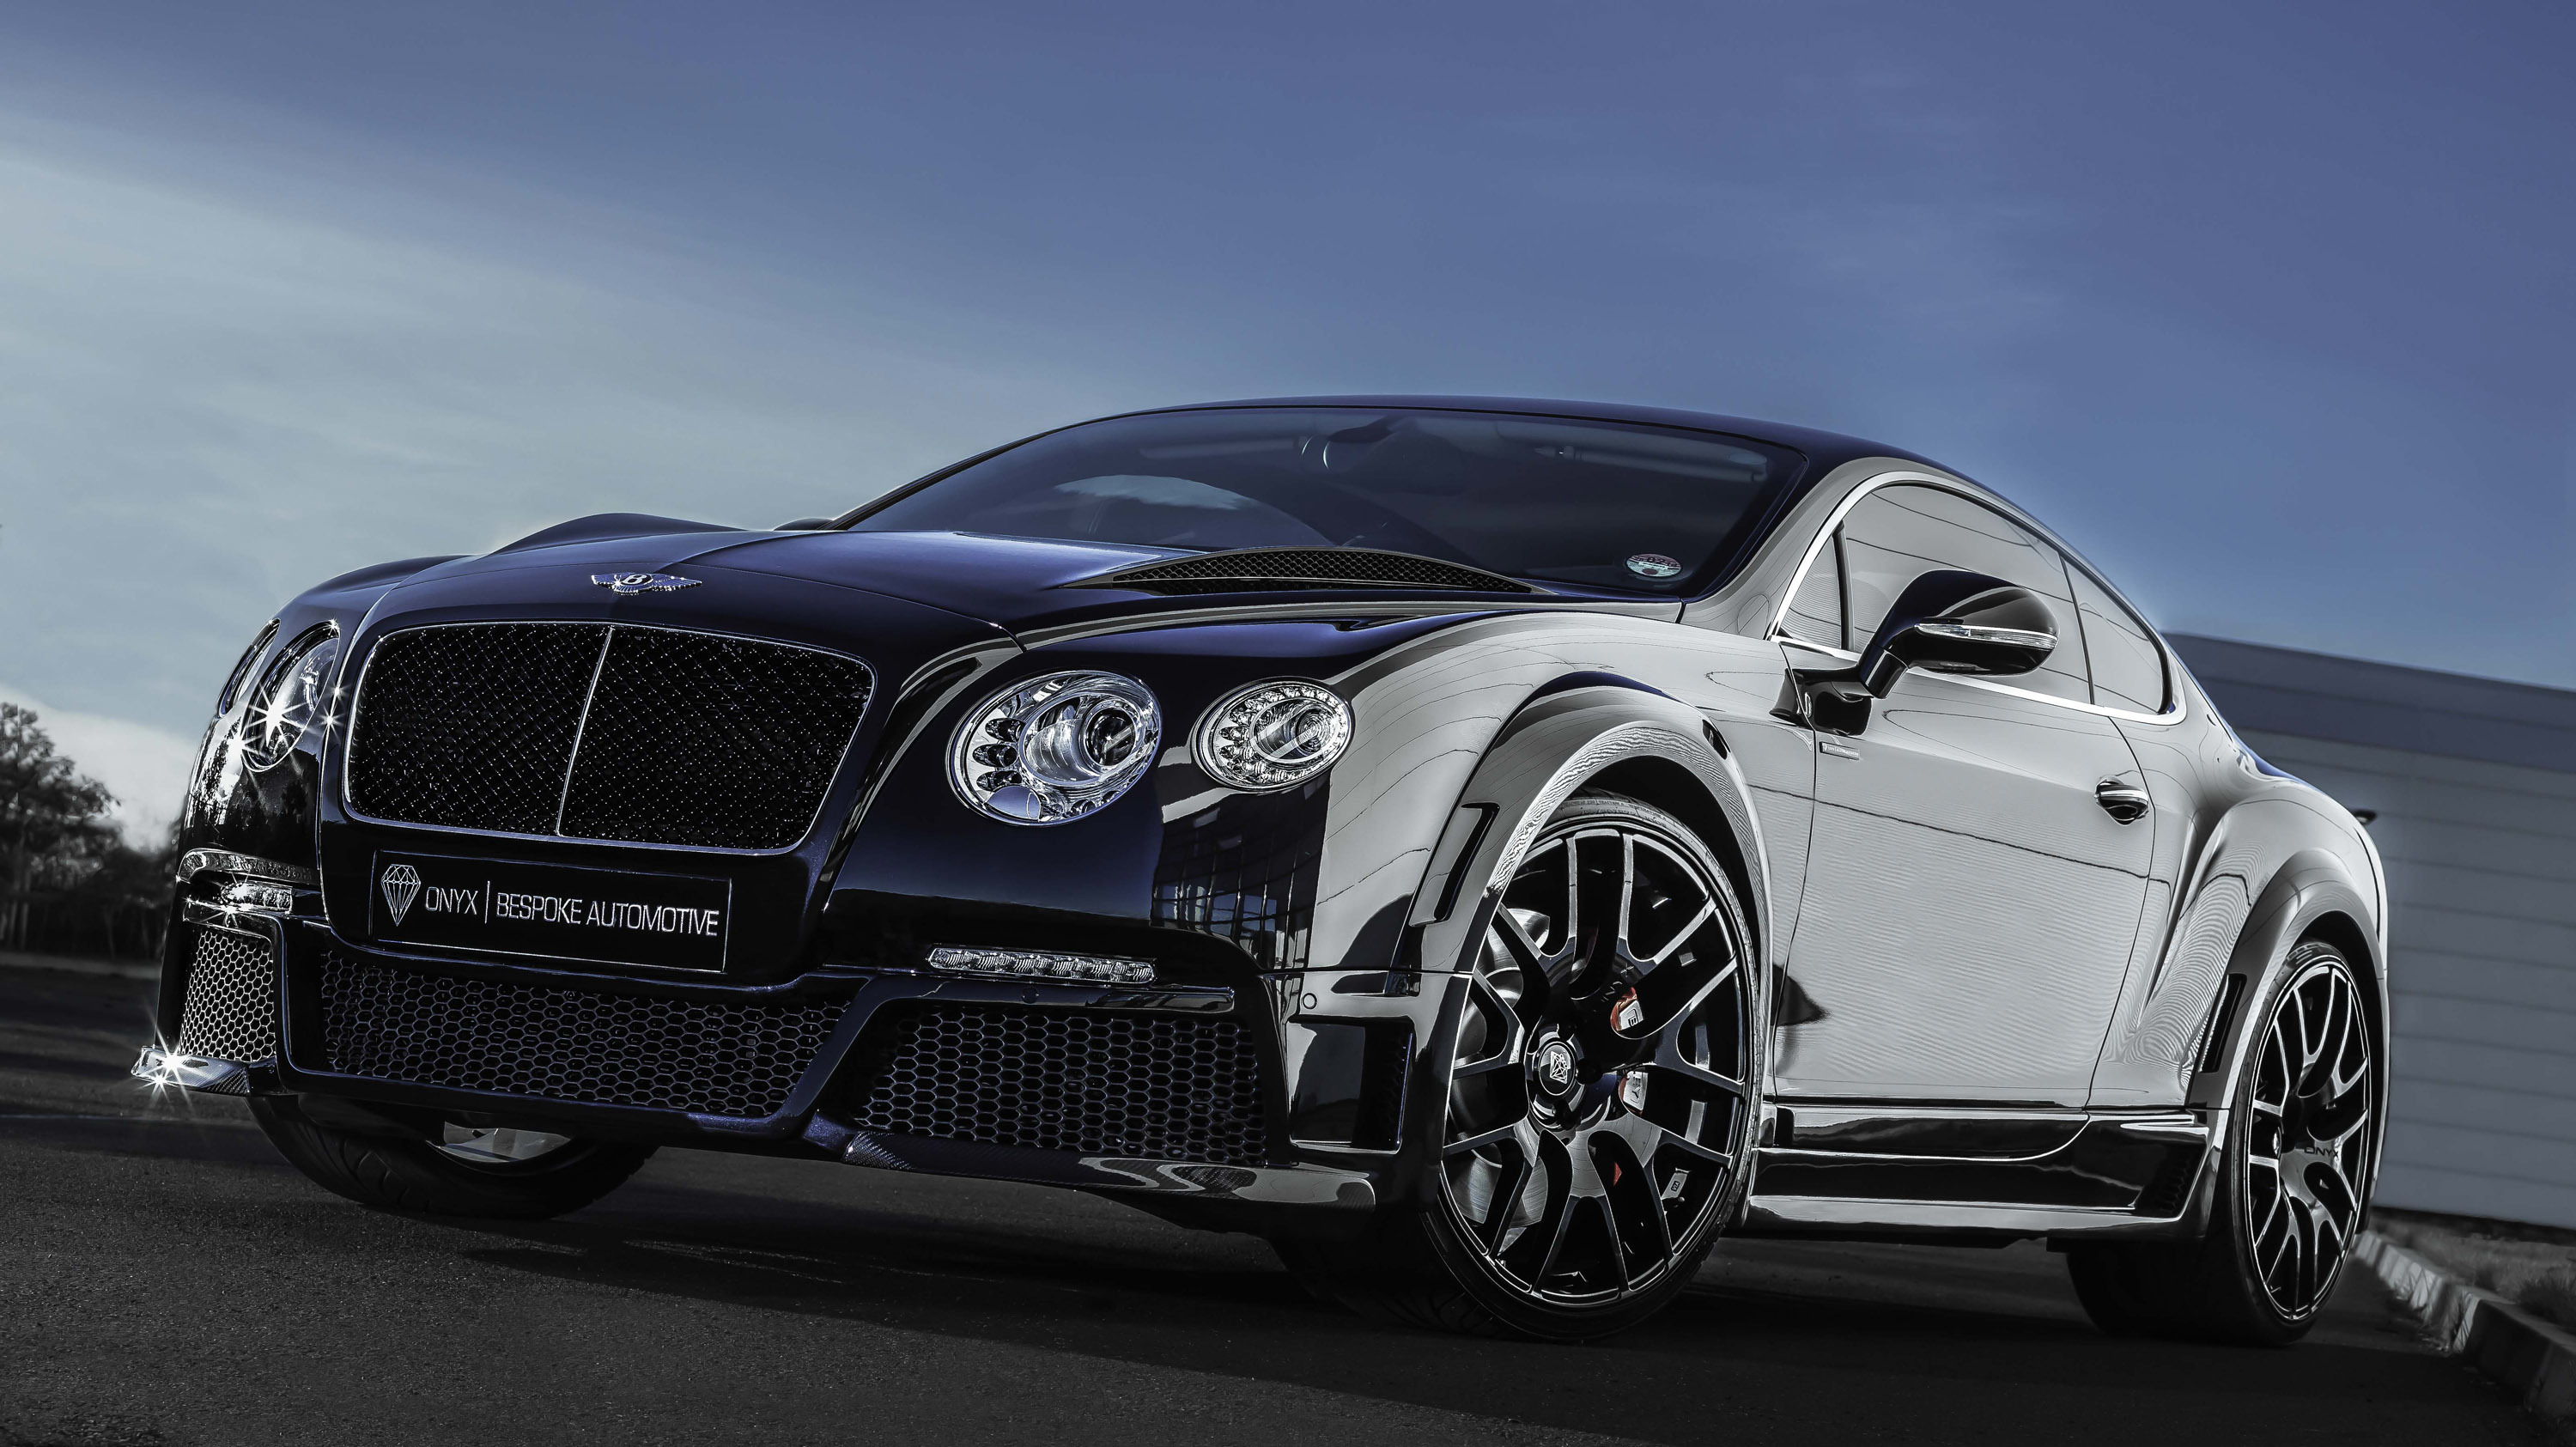 bentley, cars, continental, front collection of HD images